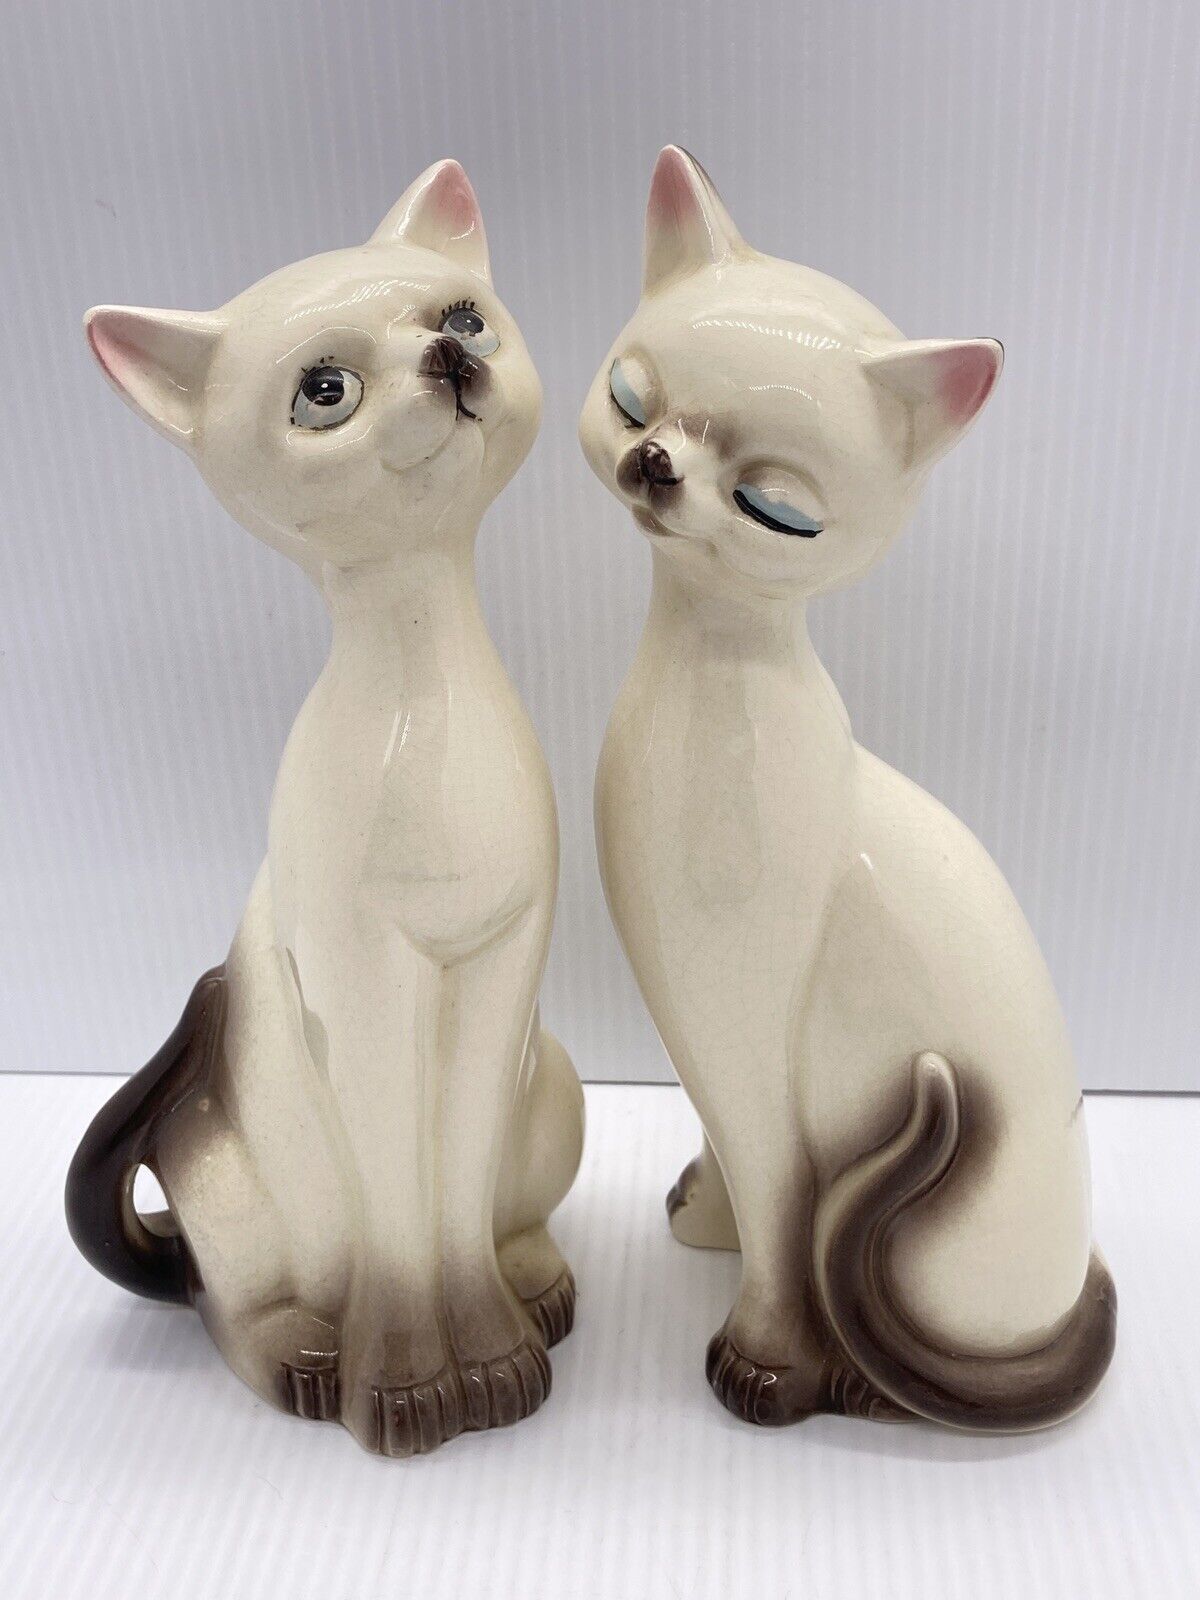 Vintage Set of 2 SIAMESE CATS Stamped JAPAN -9 3/4” TALL- Retro MCM Kitsch Pair